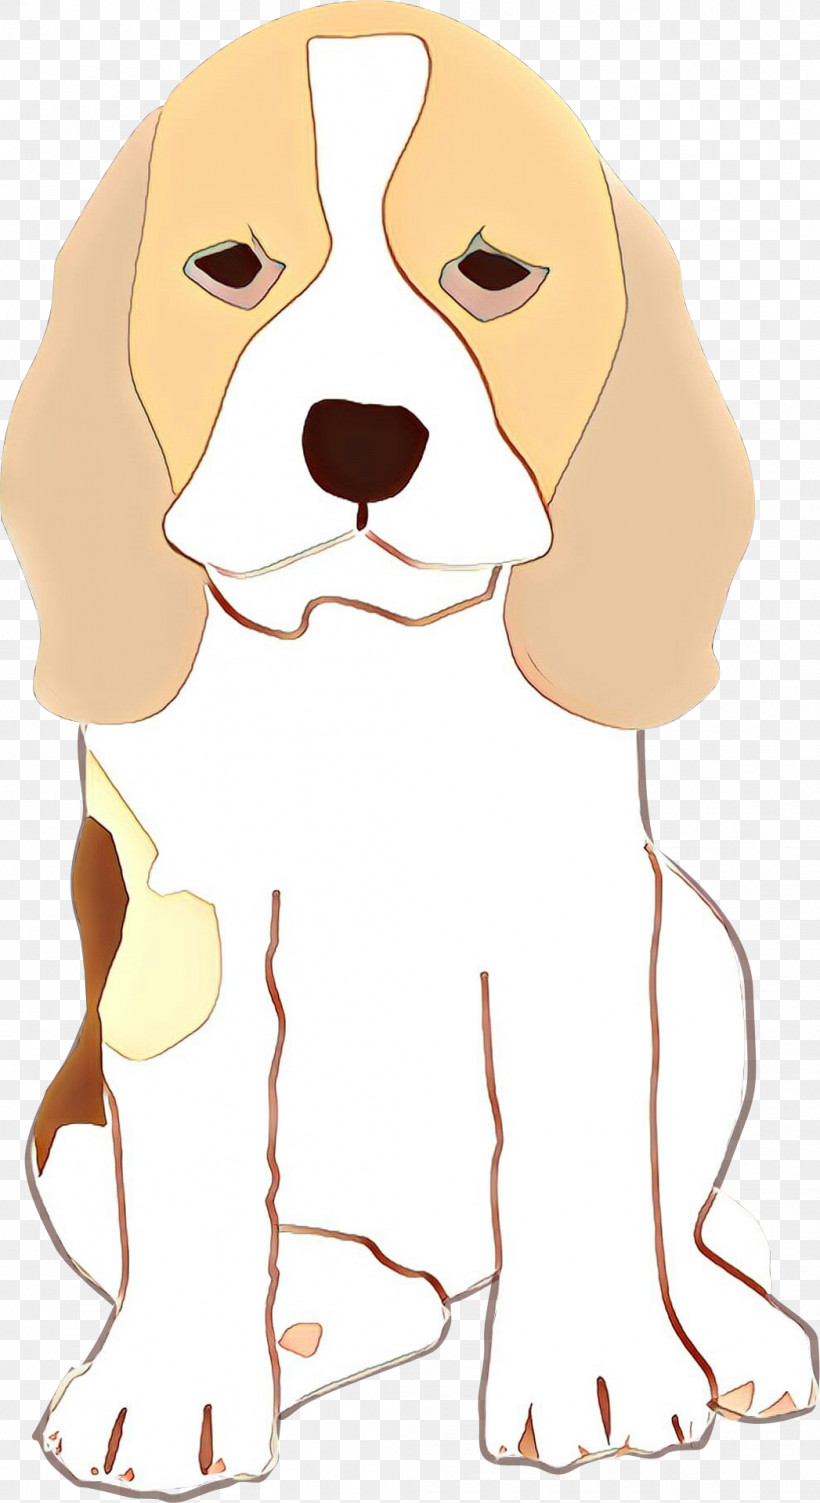 Dog Nose Beagle Snout Sporting Group, PNG, 1047x1920px, Dog, Beagle, Nose, Snout, Sporting Group Download Free